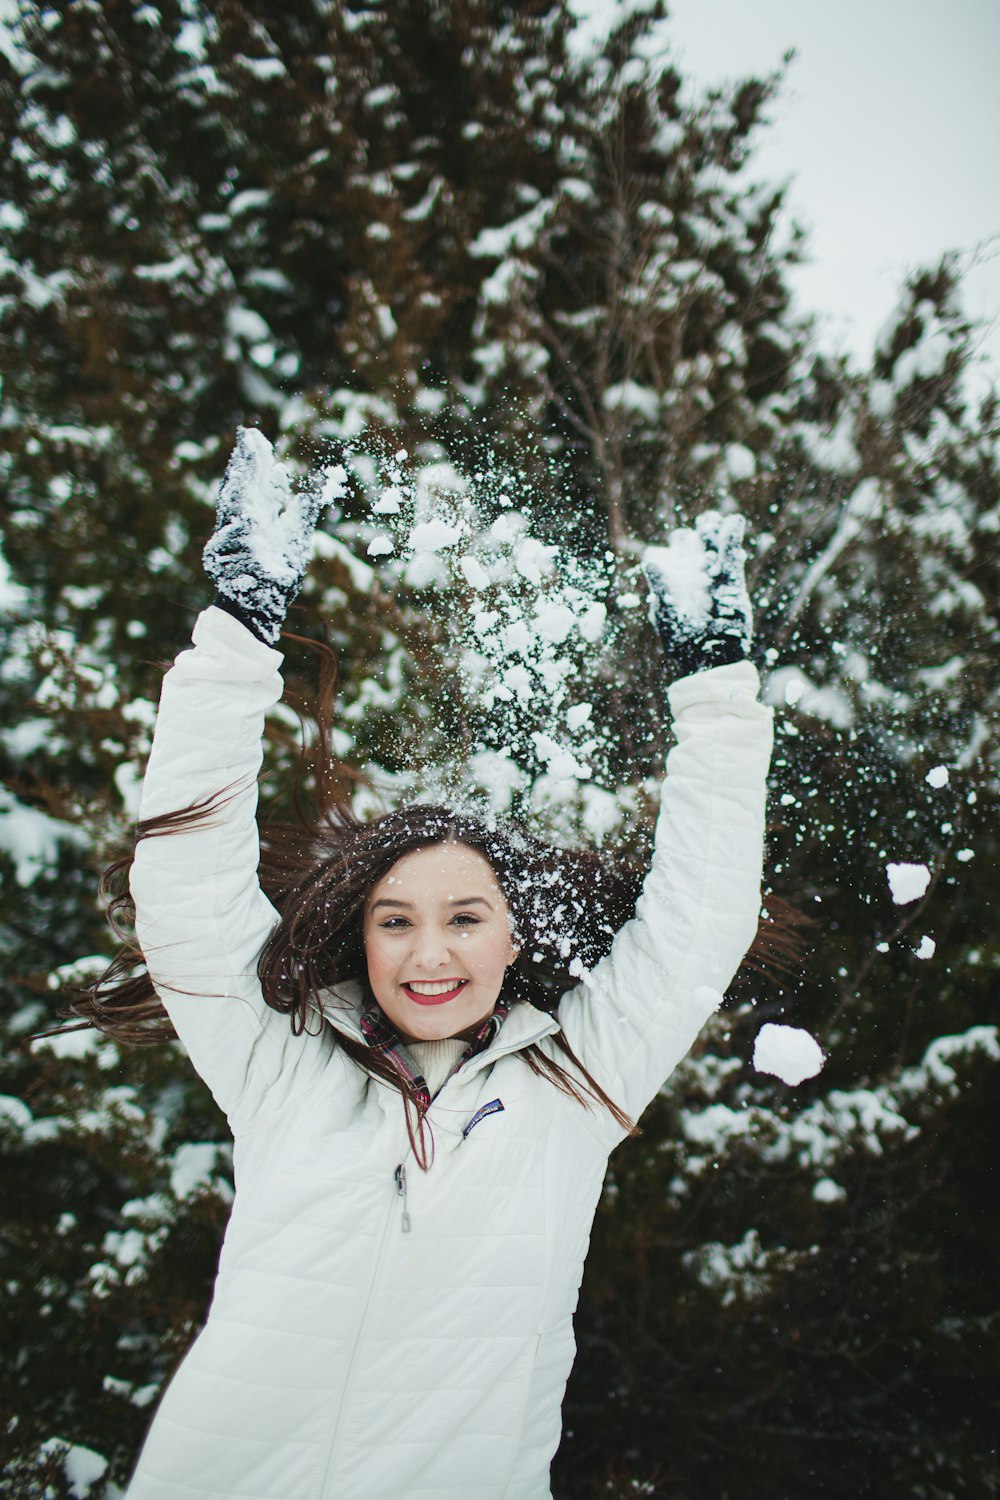 girl in white jacket standing near tree with snow